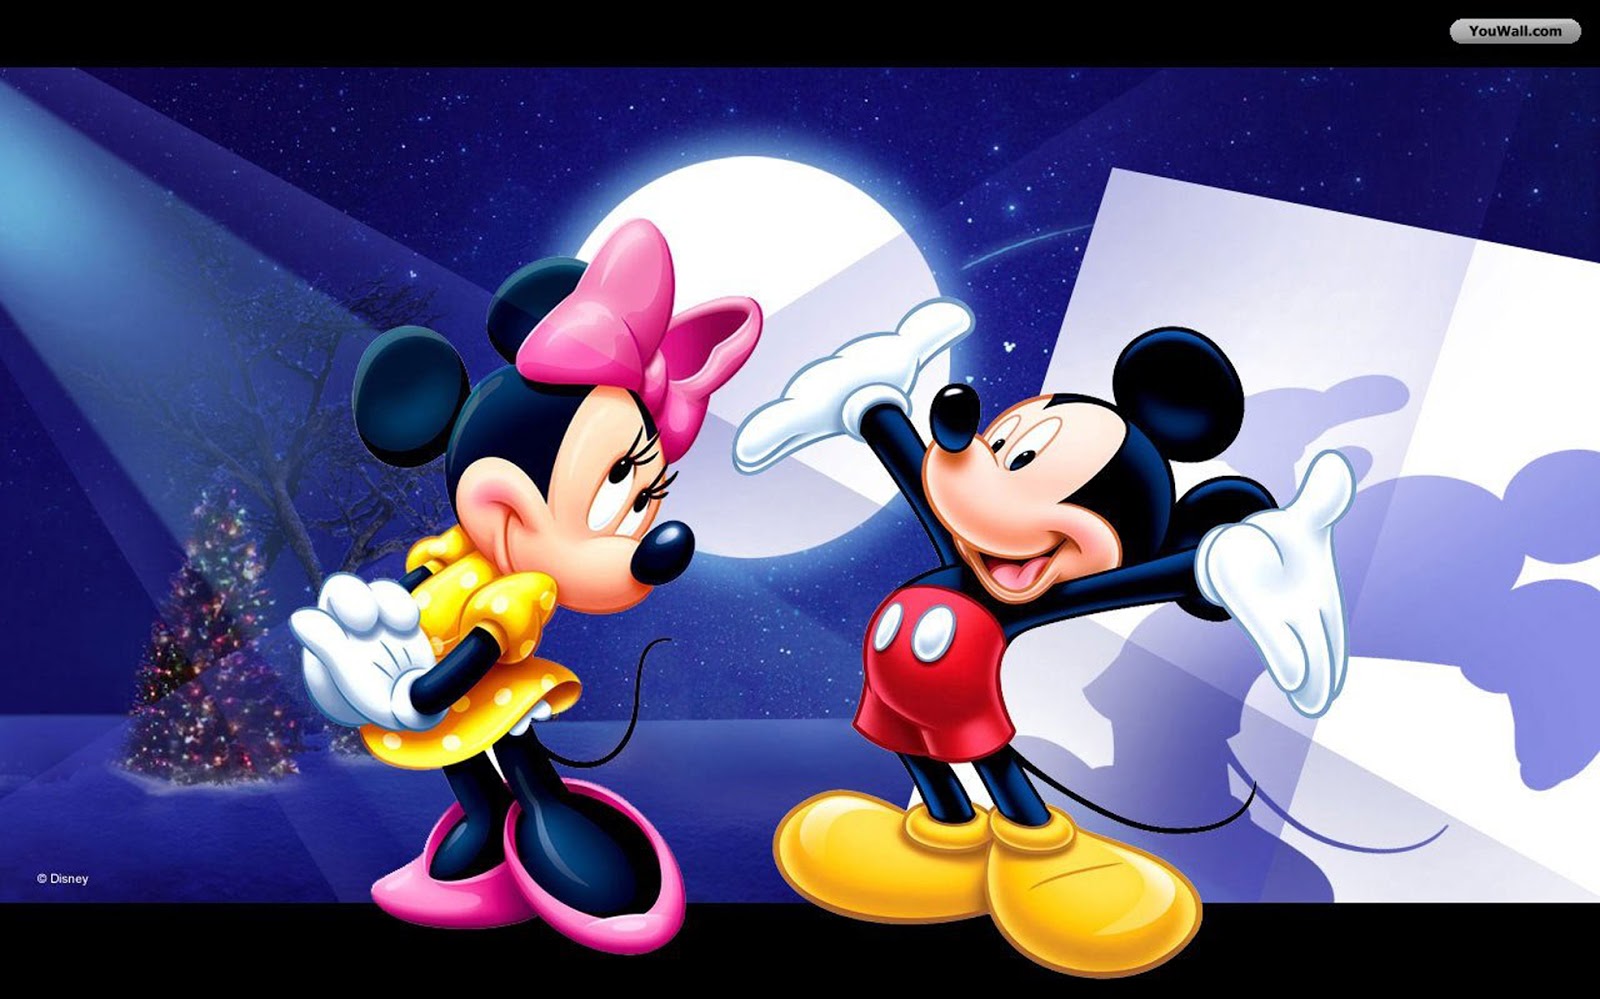 Minnie Mouse And Mickey In Love Wallpaper Image